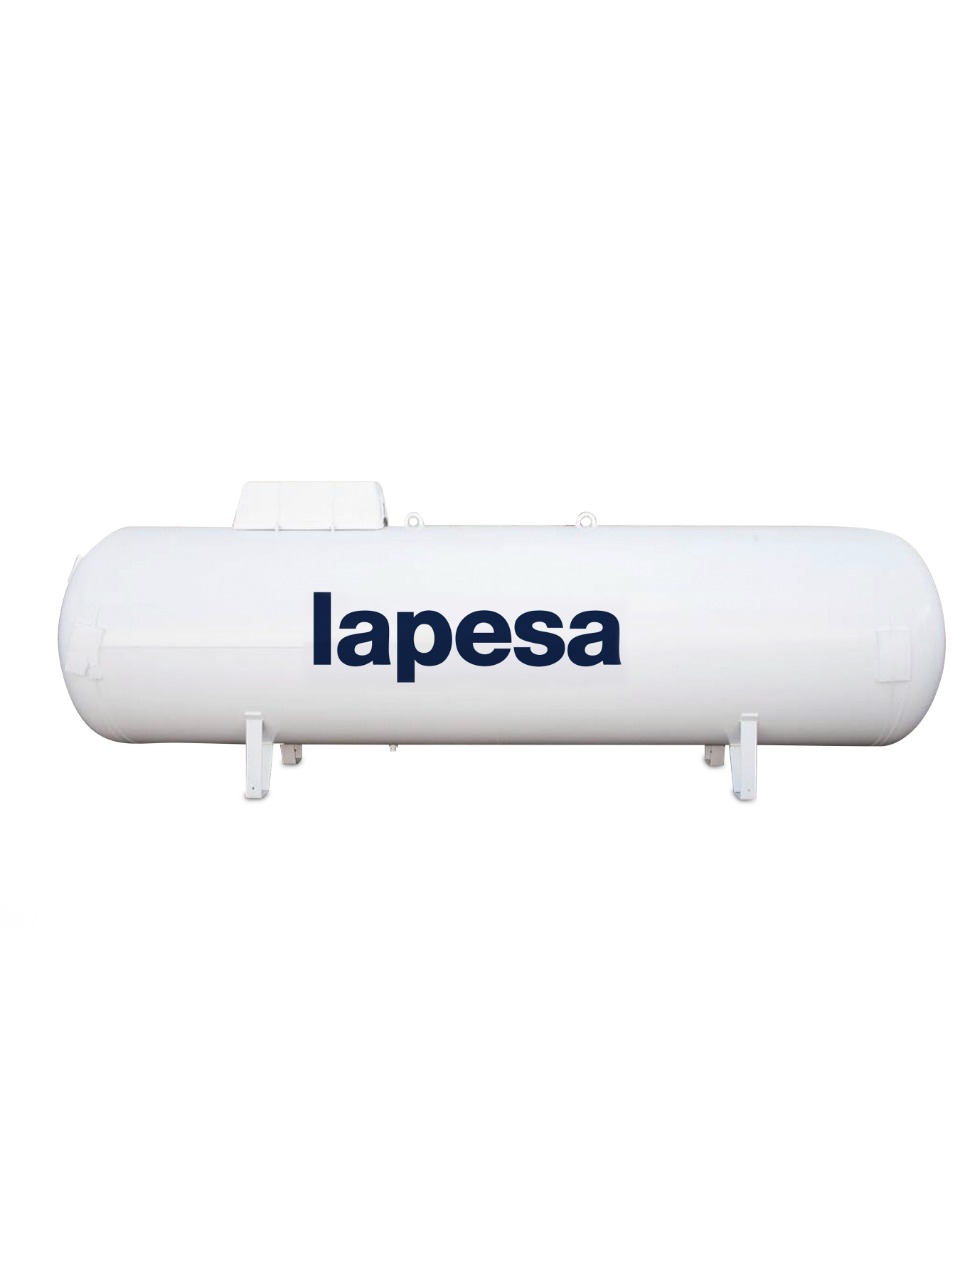 LPG TANK LAPESA 4880 LITERS ABOVE GROUND WITH STANDARD VALVE FITTINGS